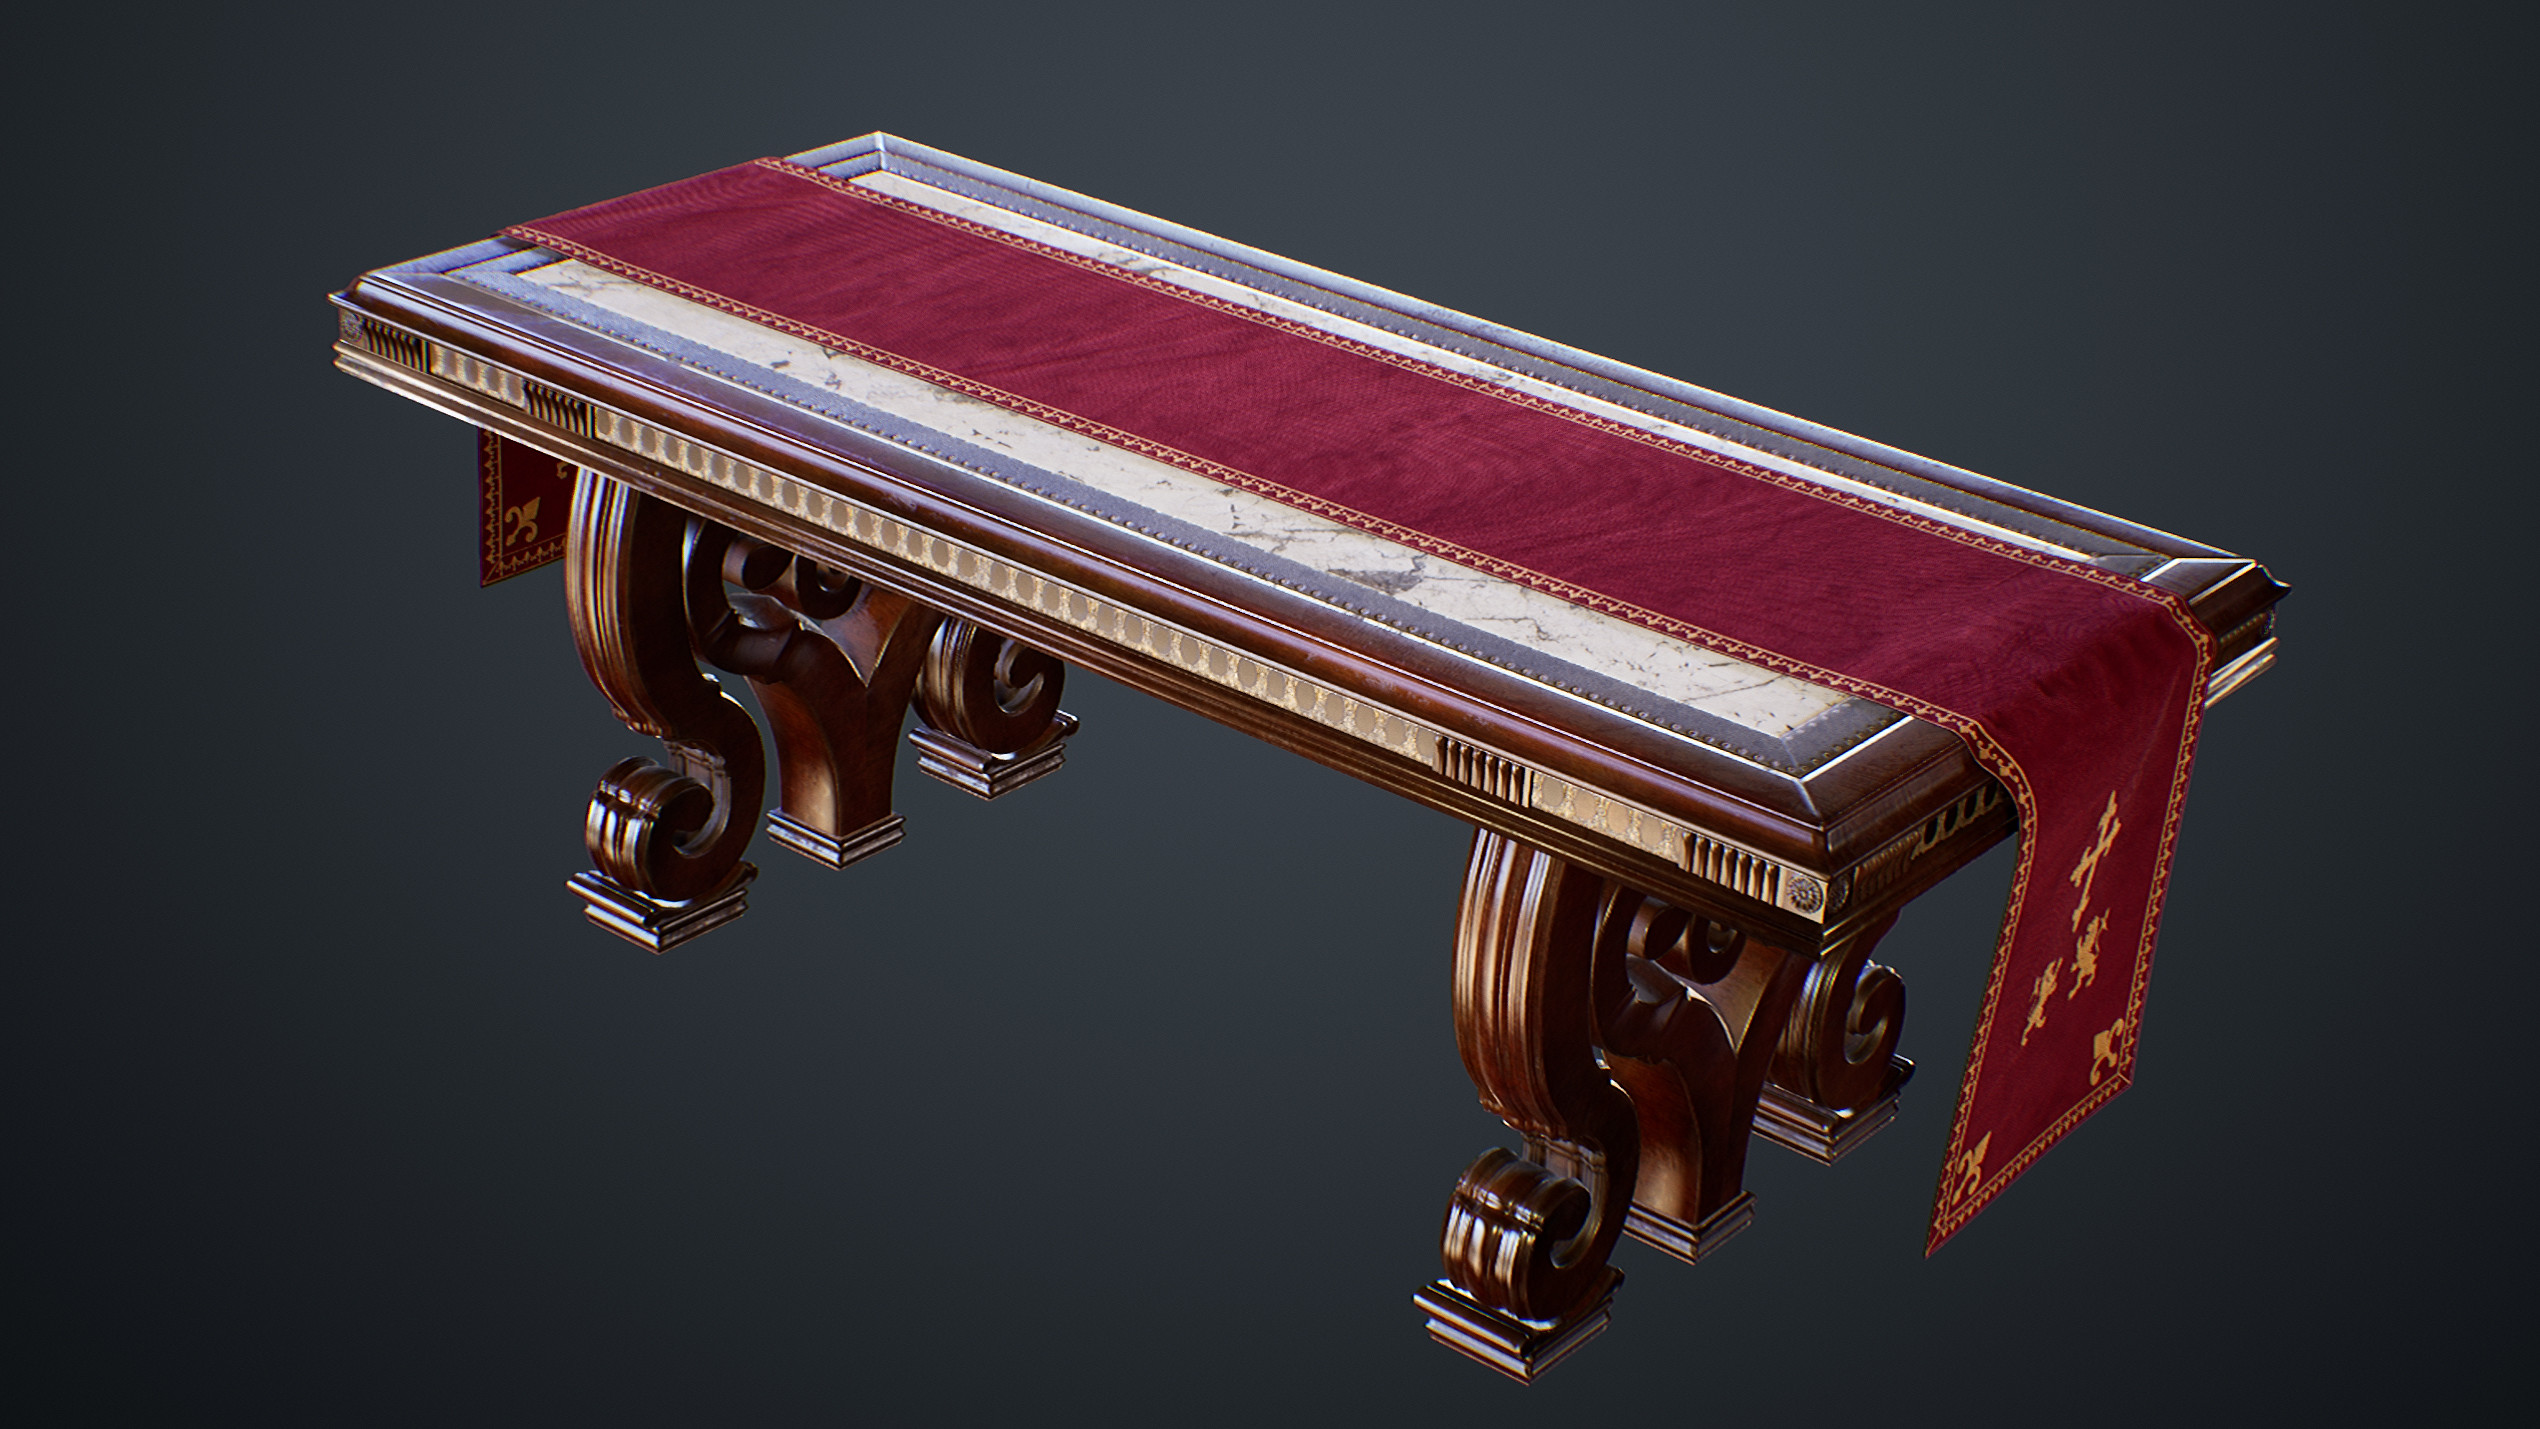 UE4 screenshot of the victorian table.